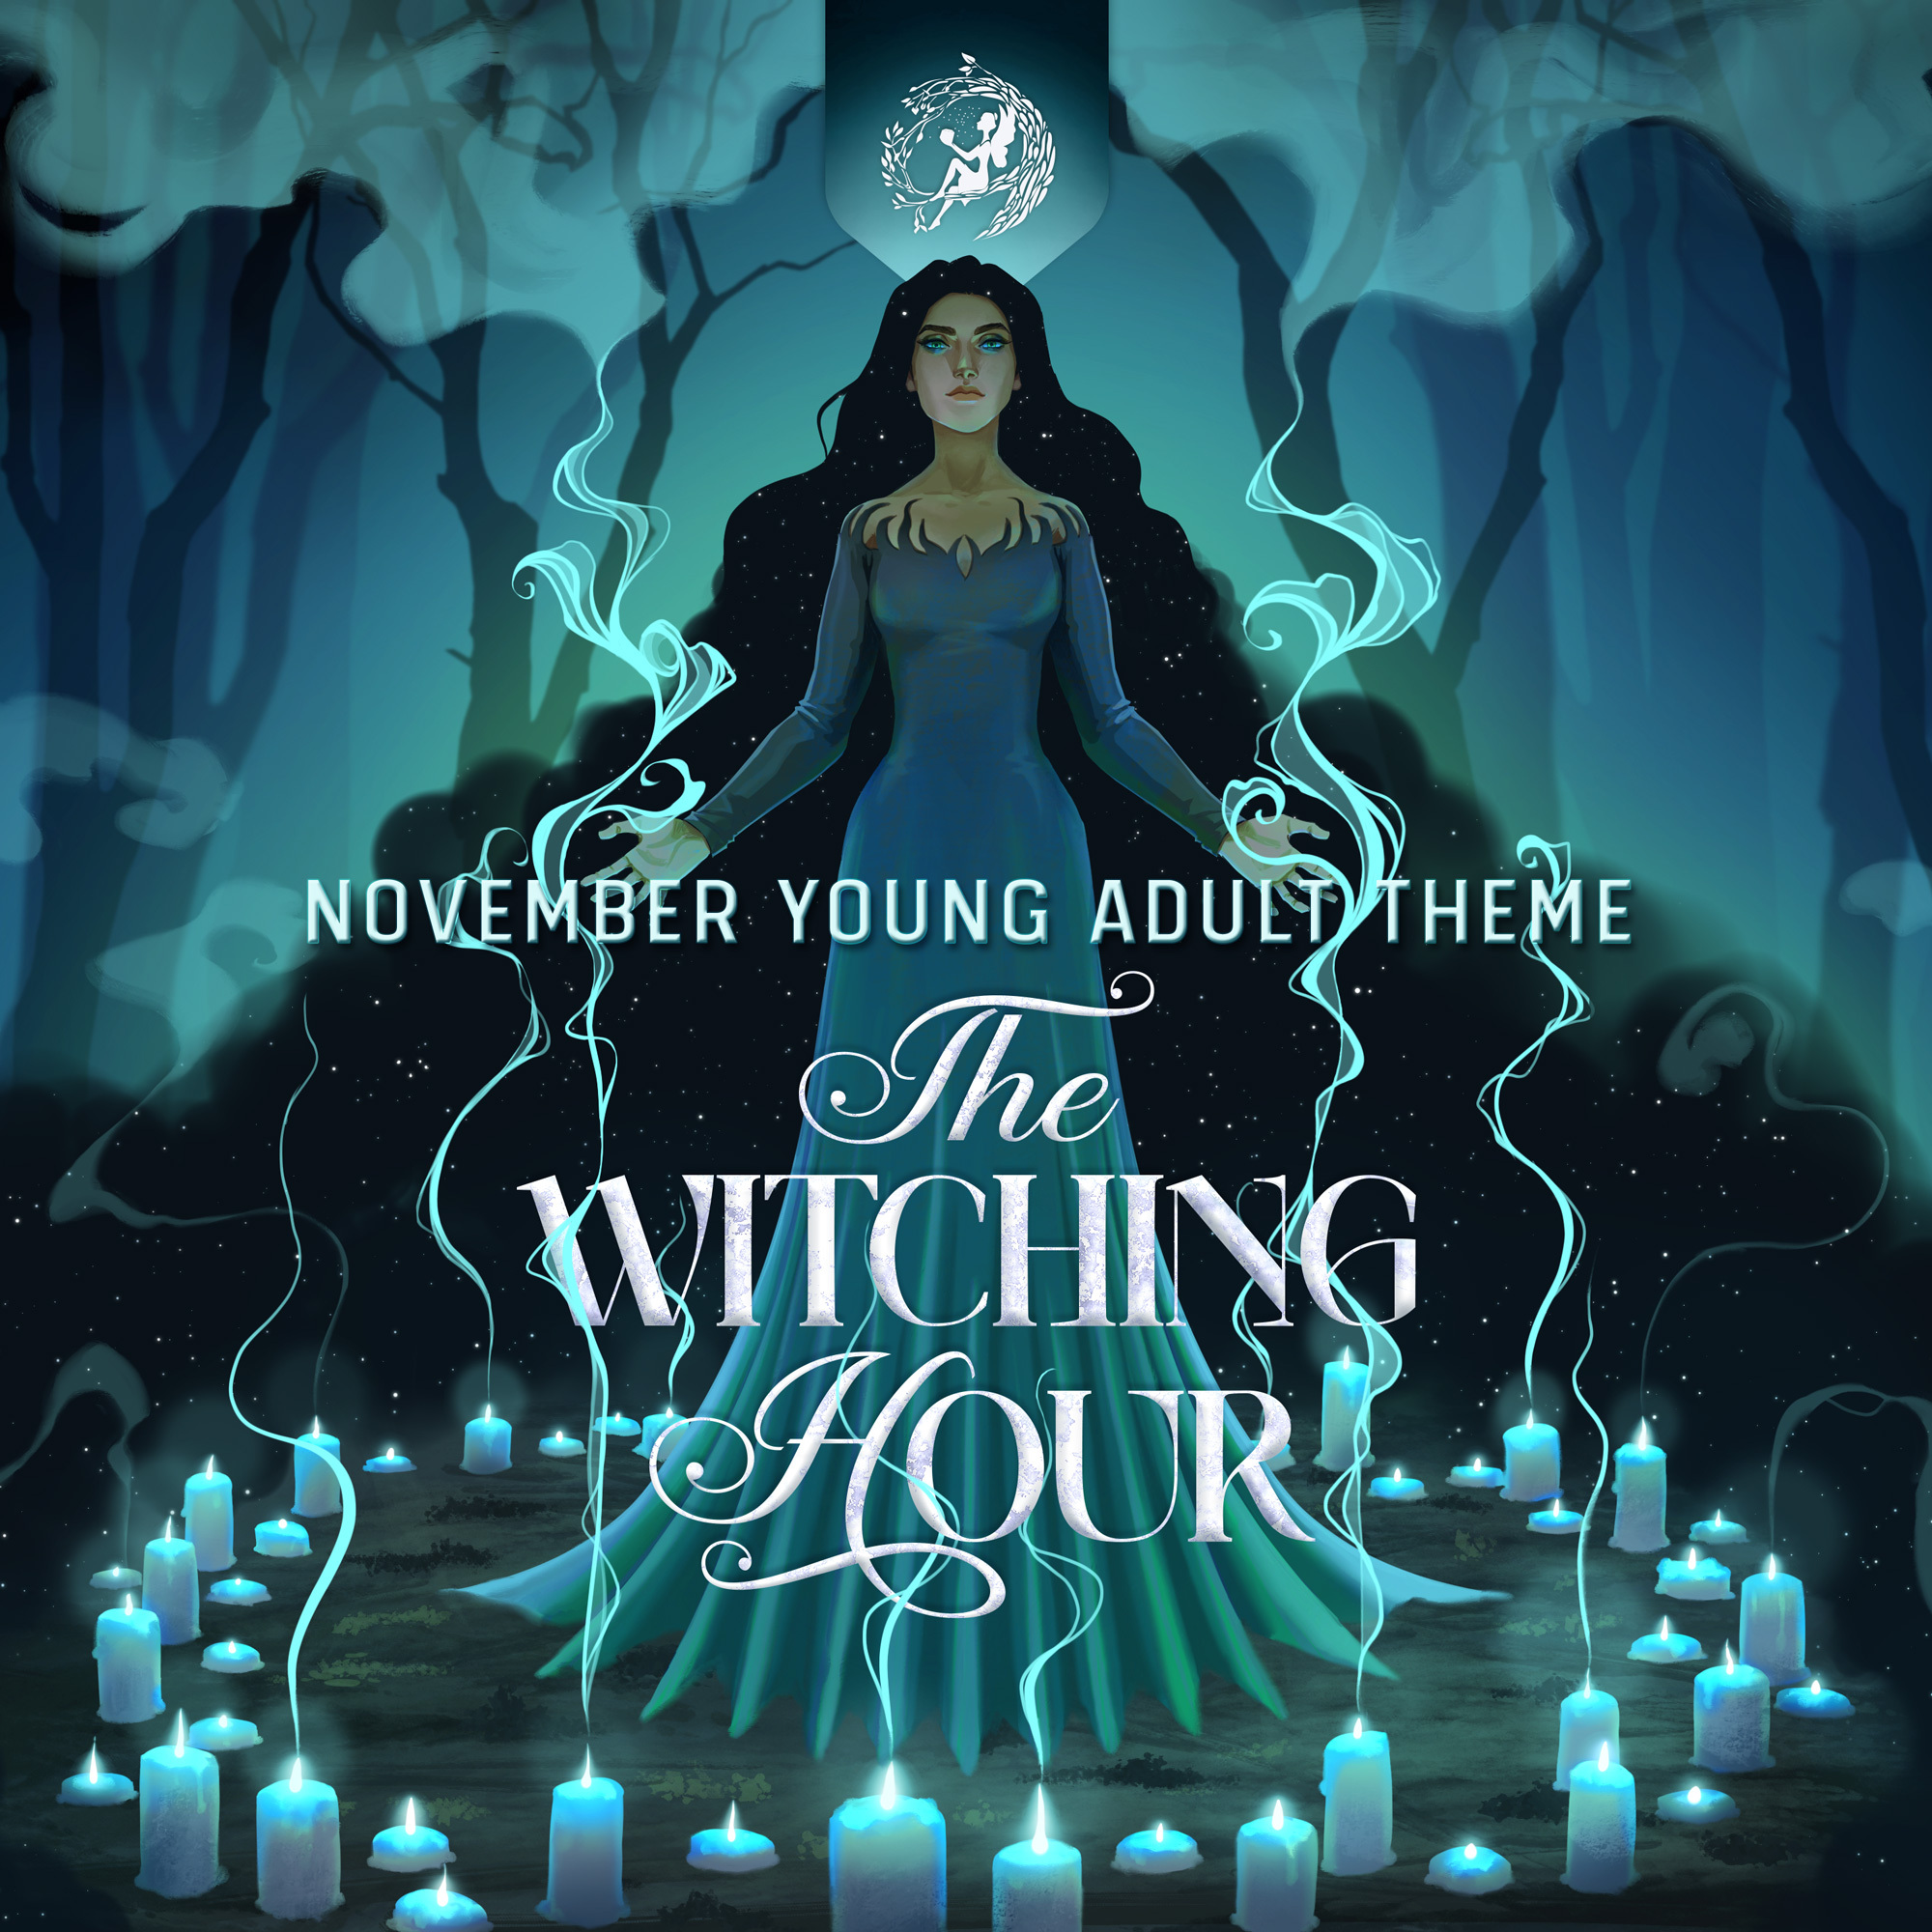 November Young Adult Theme: THE WITCHING HOUR